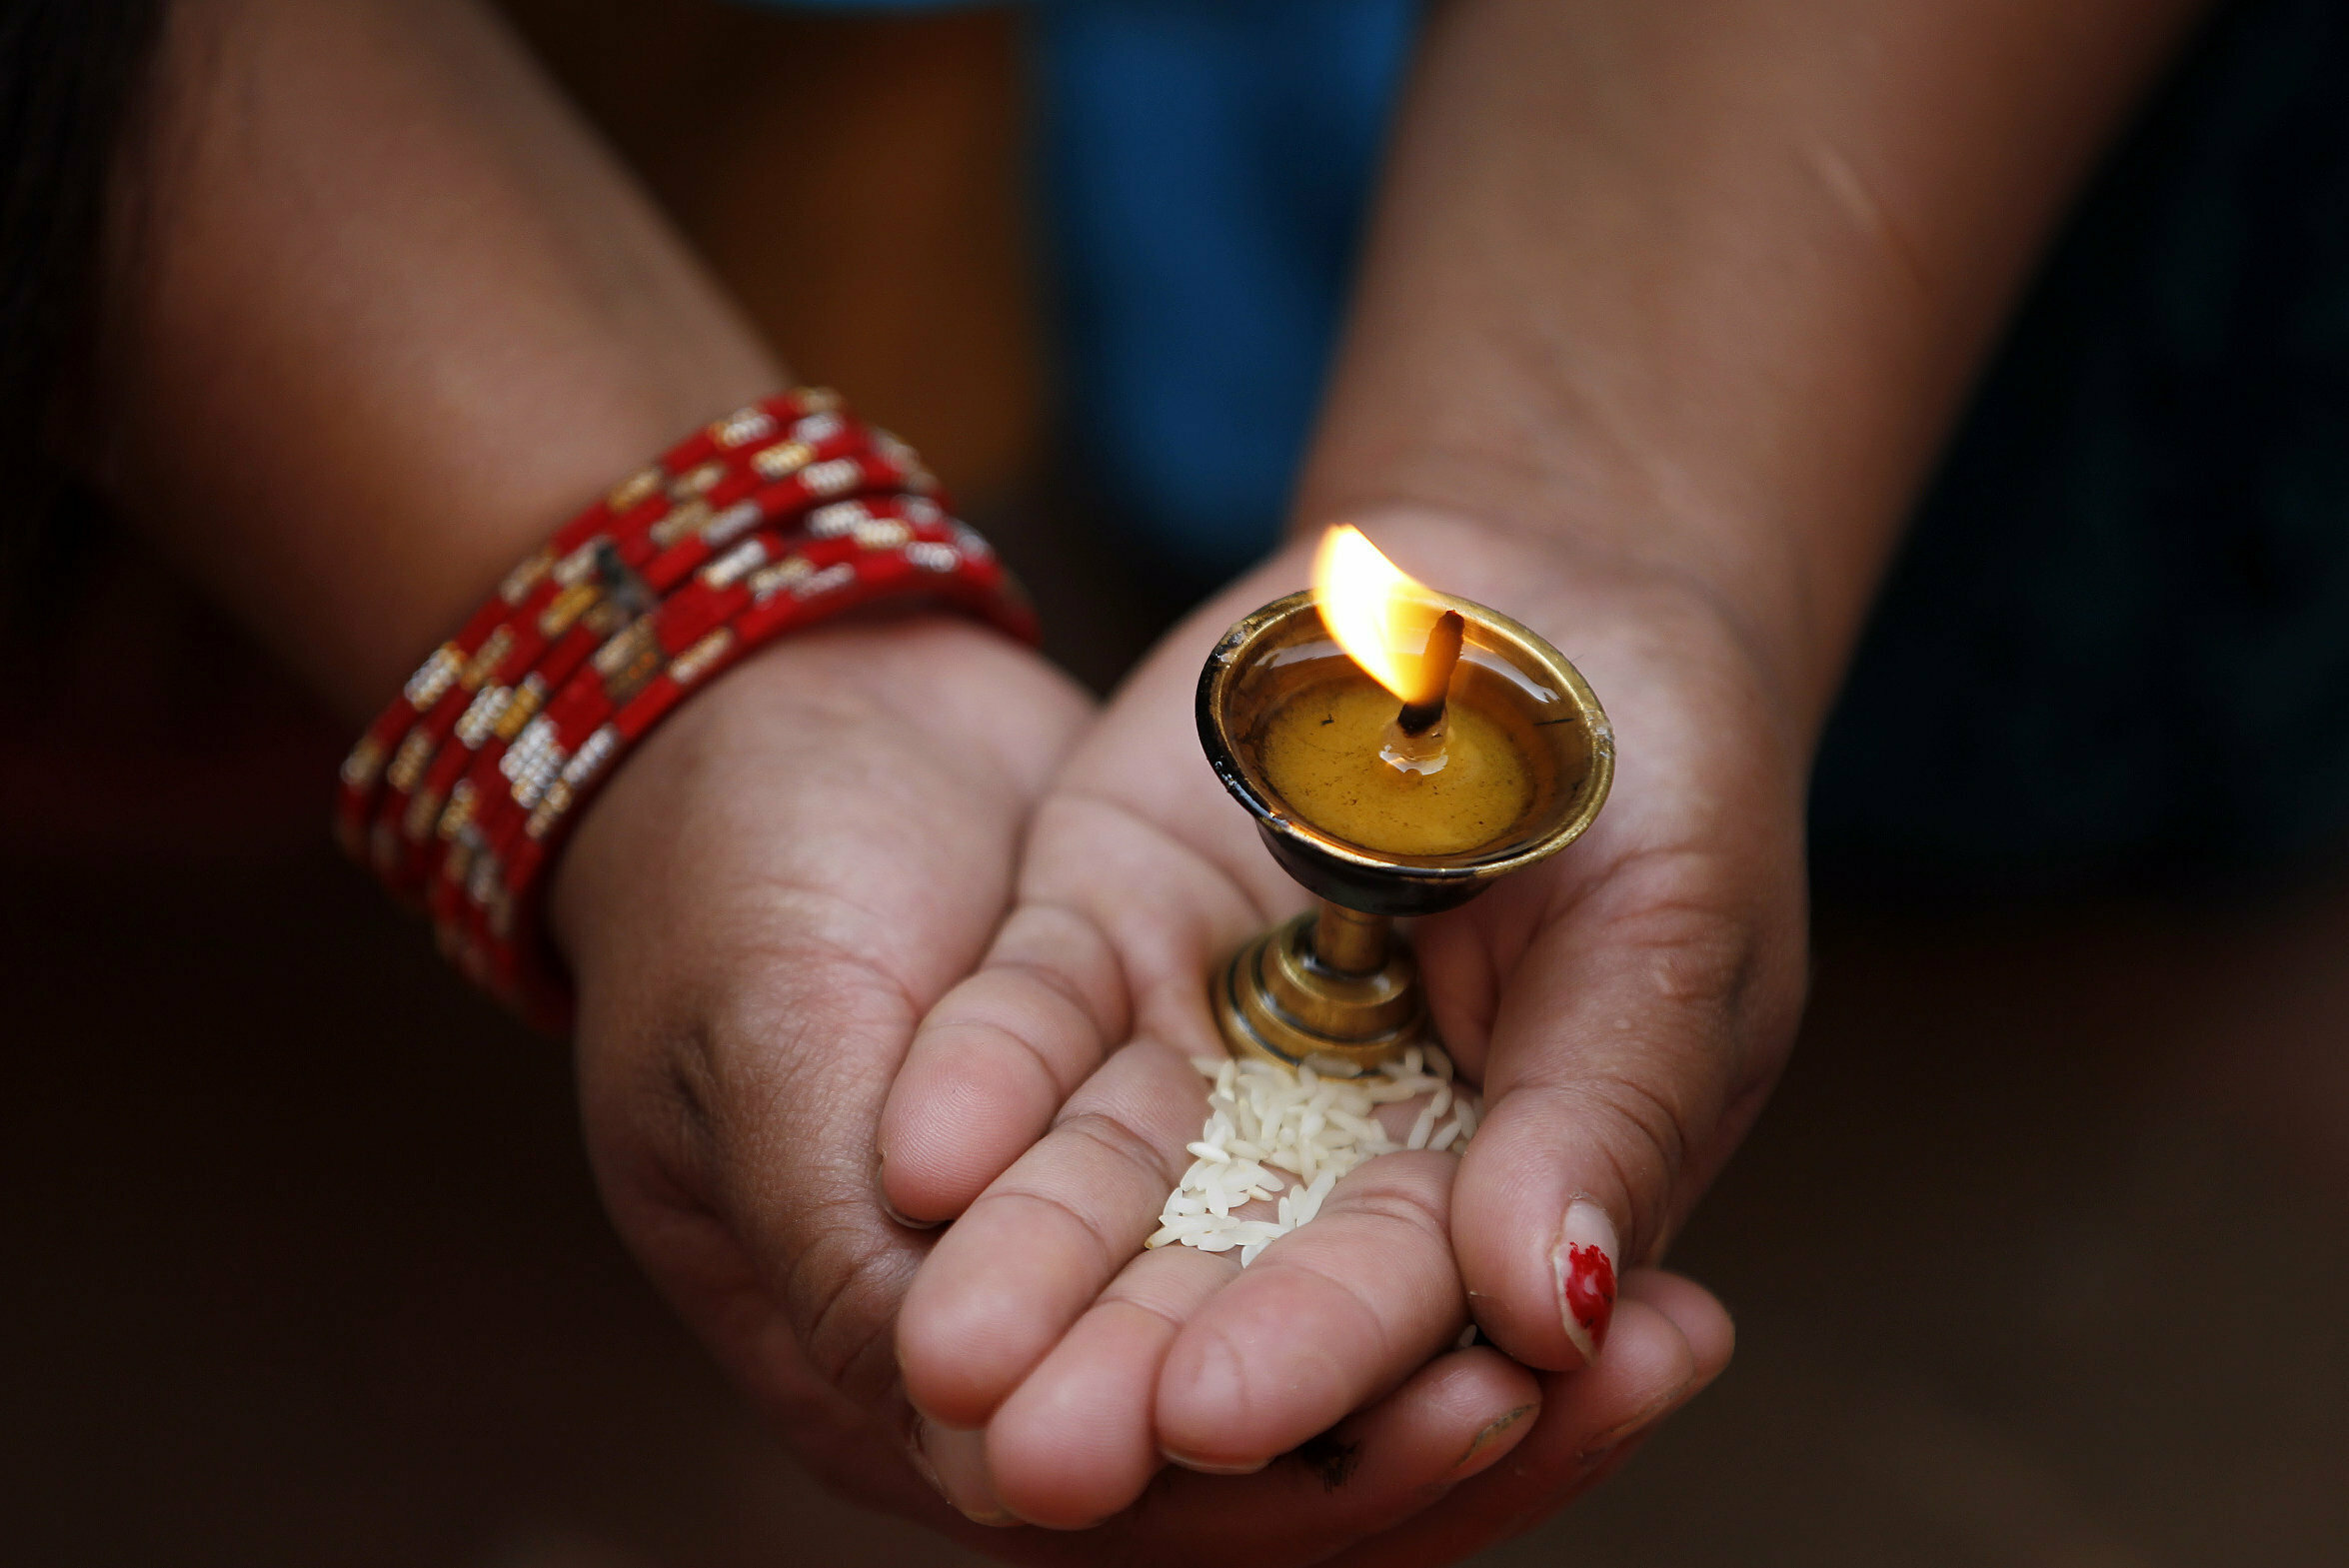 A Buddhist devotee holds a butter lamp during Buddha Jayanti, or Buddha Purnima, festival in Kathmandu, Nepal, Saturday, May 18, 2019. The festival marks the triple events of Gautam Buddha's life: his birth, his enlightenment and his attaining a state of Nirvana that frees believers from the circle of death and rebirth. (AP Photo/Niranjan Shrestha)